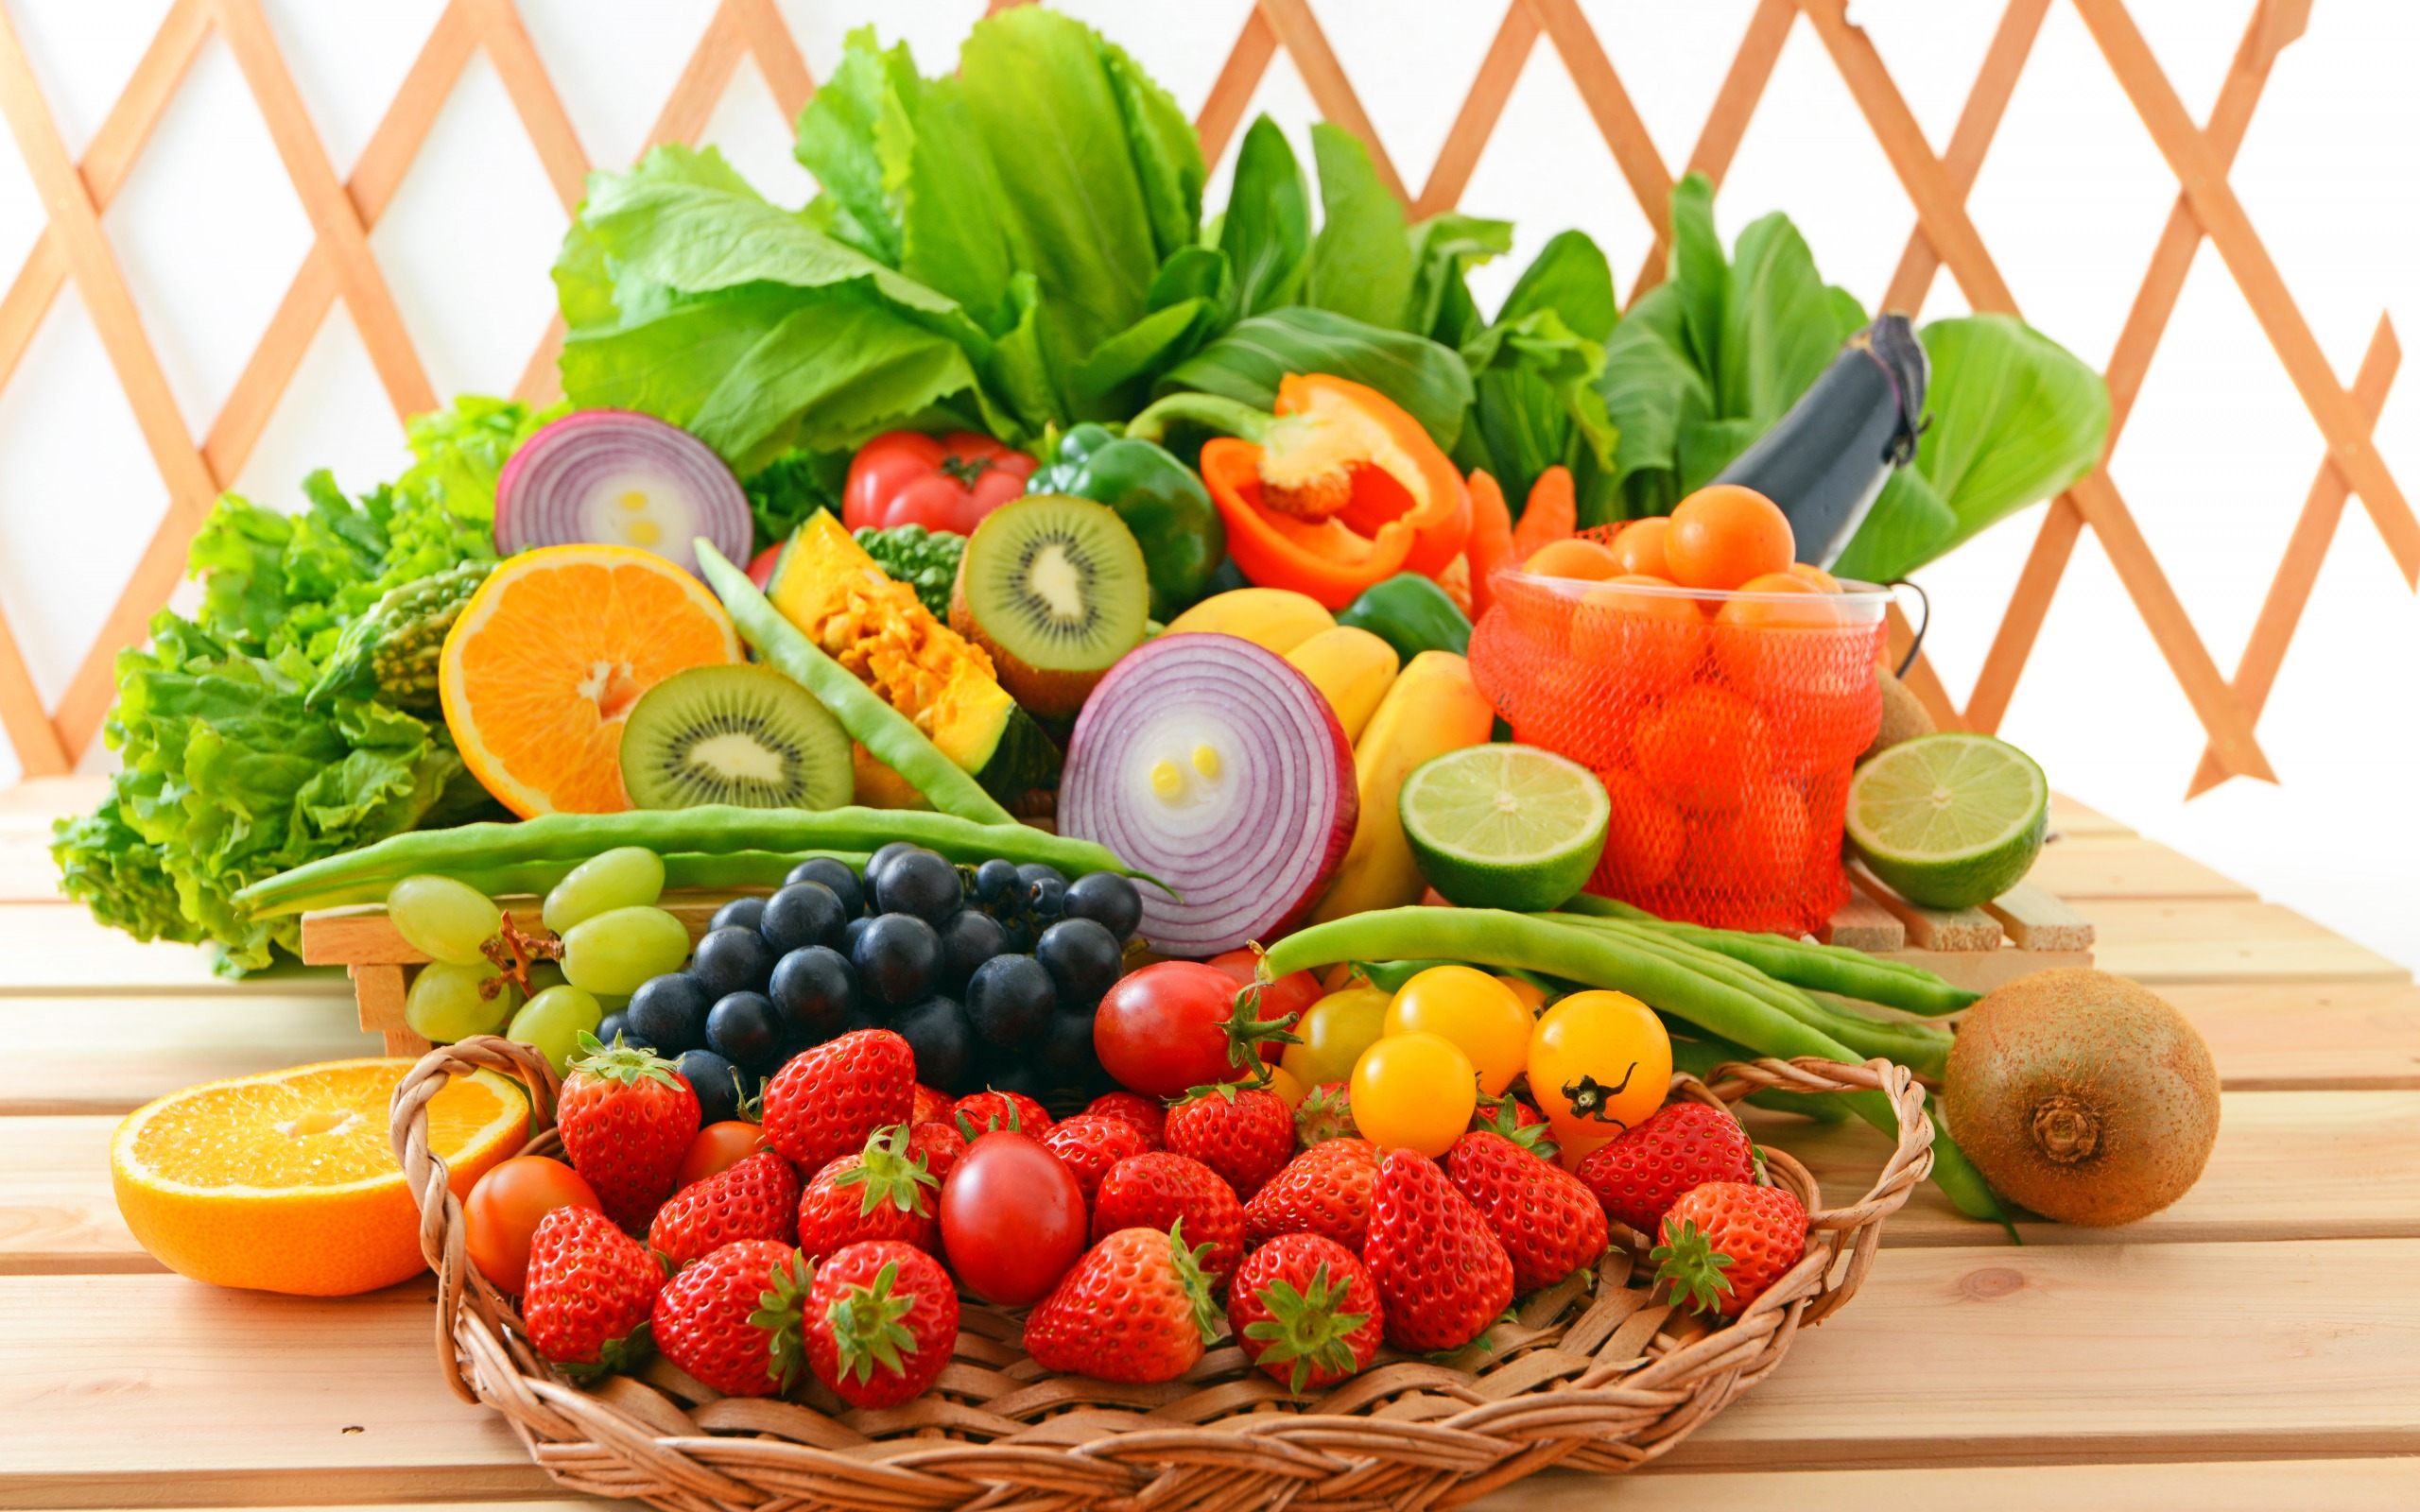 Fruit And Vegetables Wallpaper Hd Free Download For - All Vegetables Images  Hd - 2560x1600 Wallpaper 